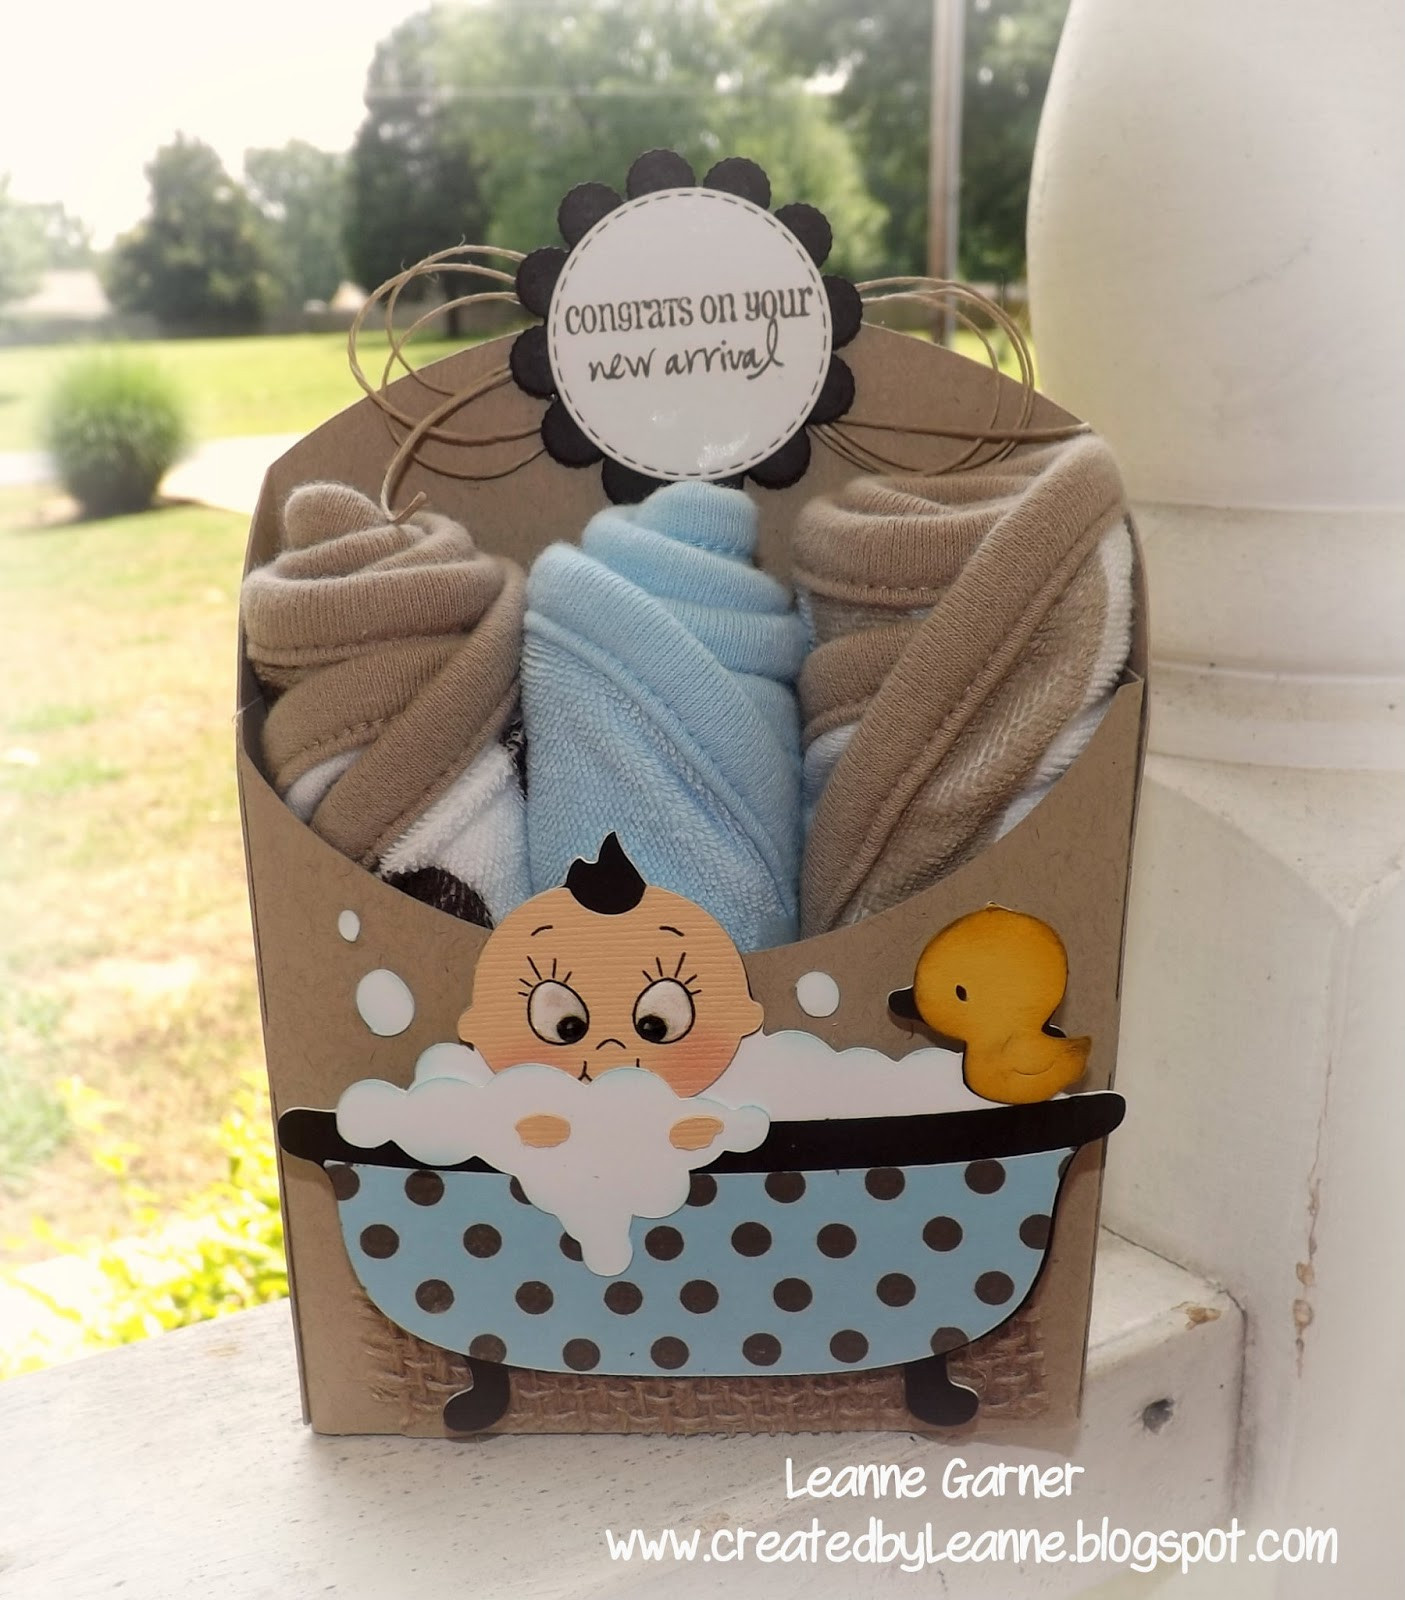 Cute Baby Shower Gift Ideas For Boys
 Unique Cool New Baby Gifts Baskets For Boys & Girls